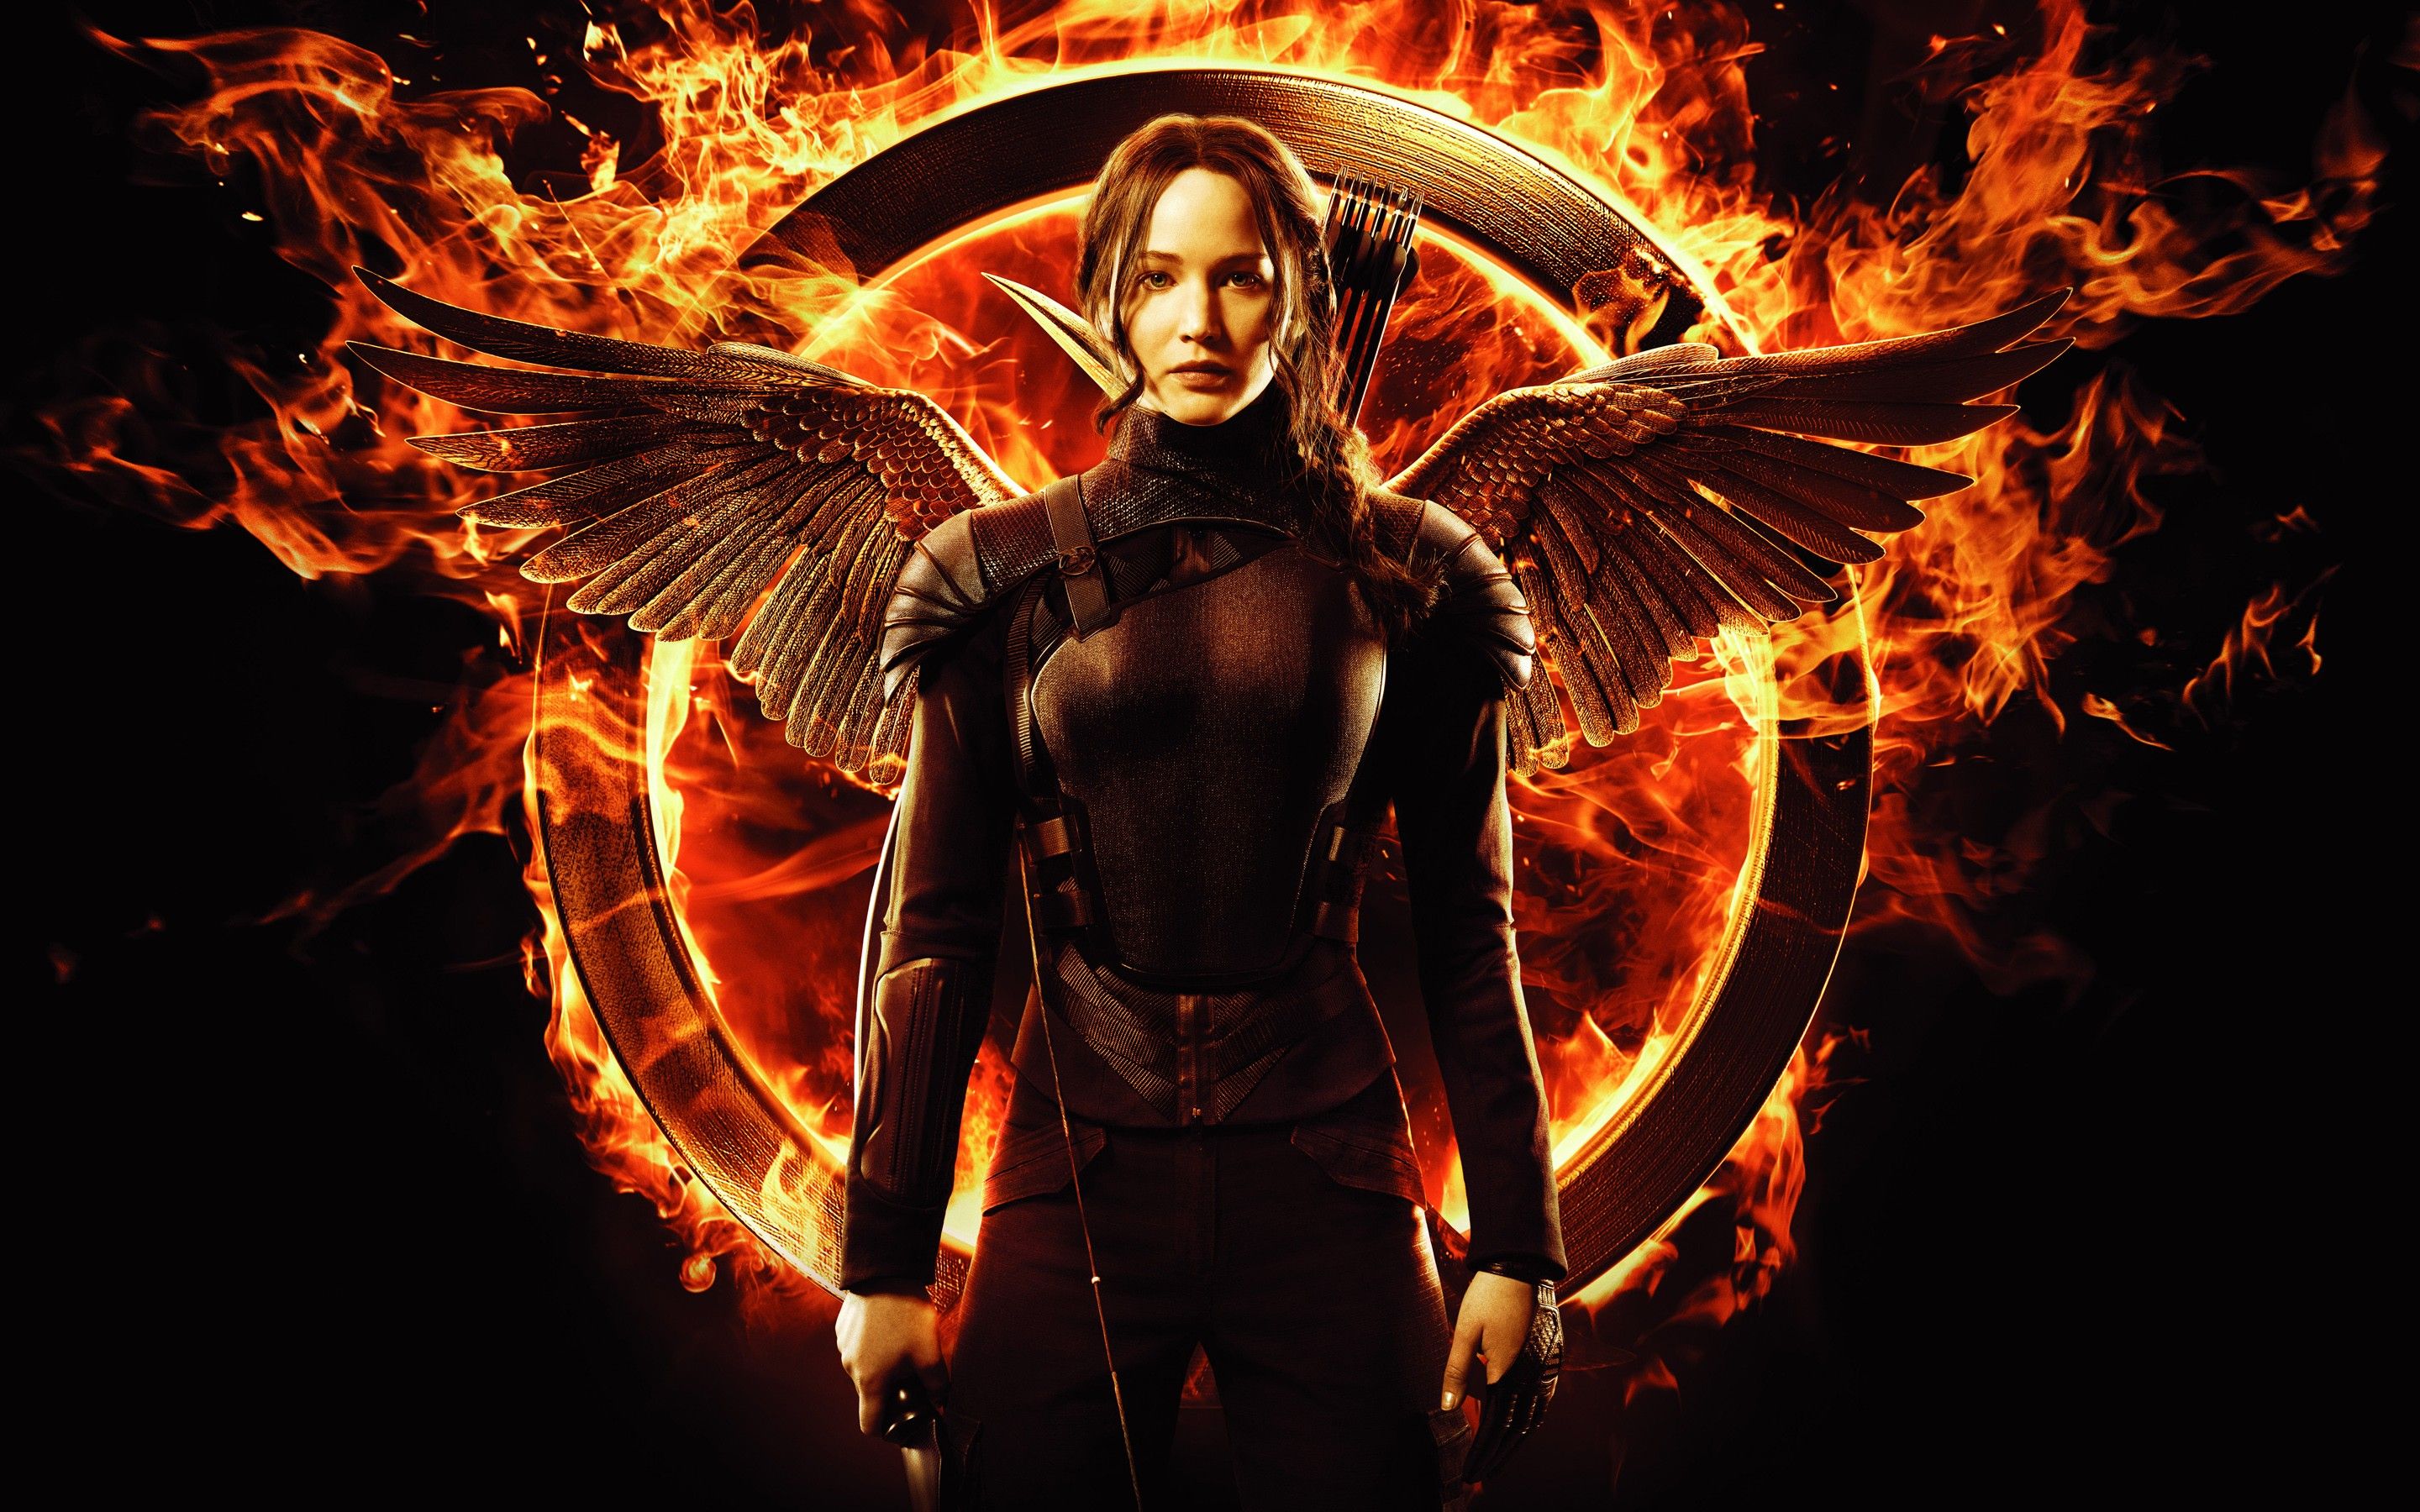 Film Review The Hunger Games Mockingjay Part 1